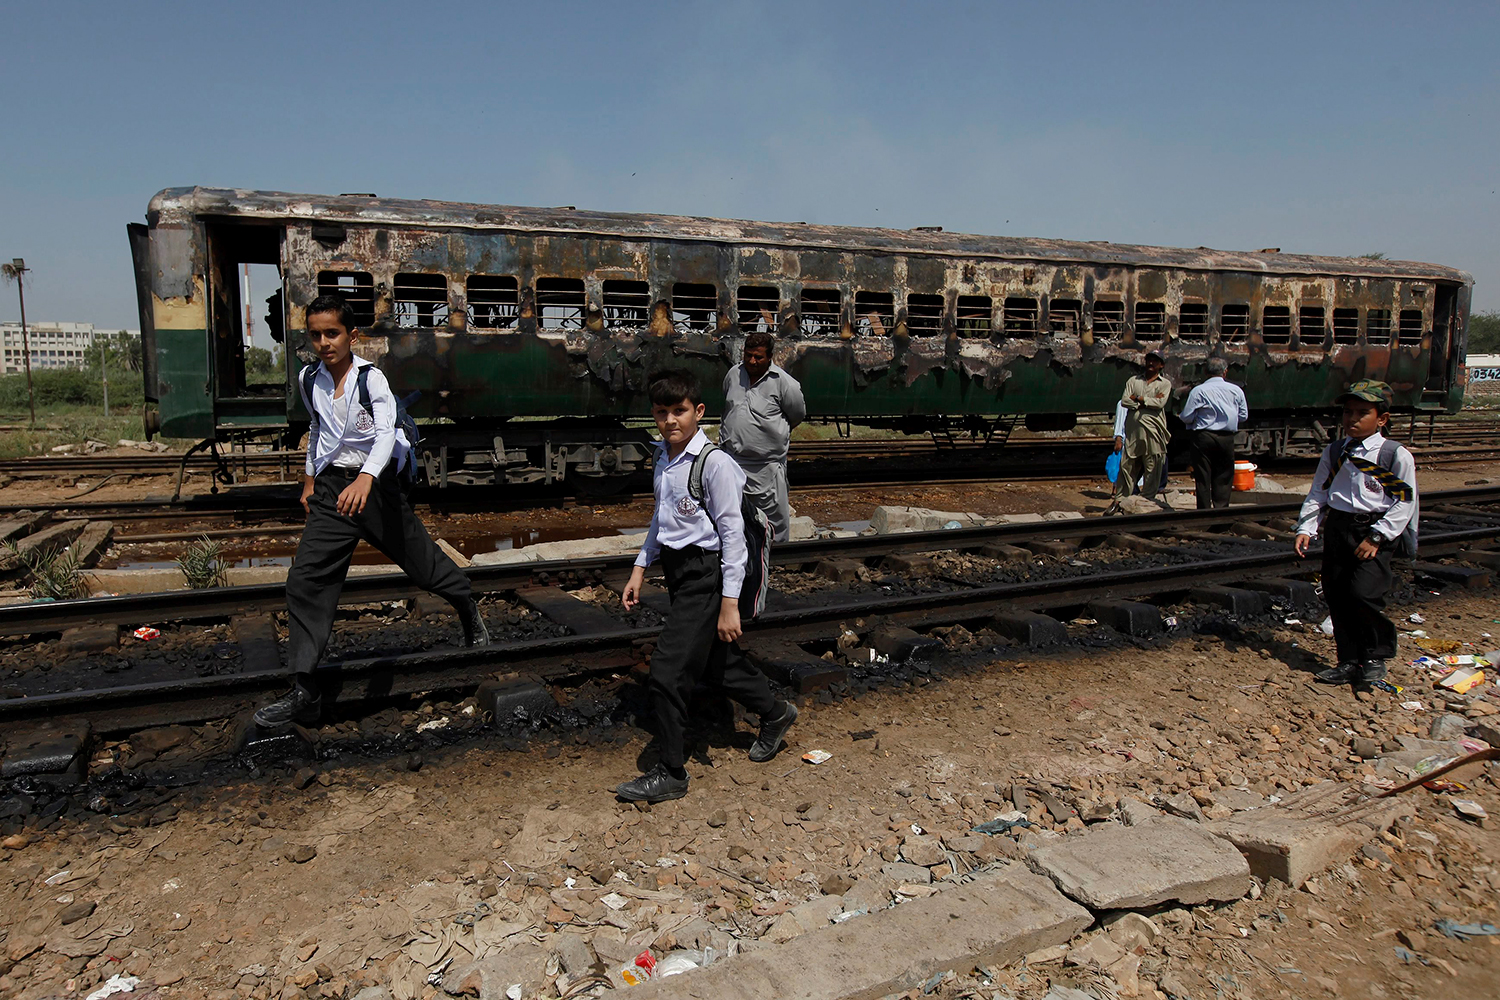 Three people killed after a bomb exploded a passenger train in Pakistan